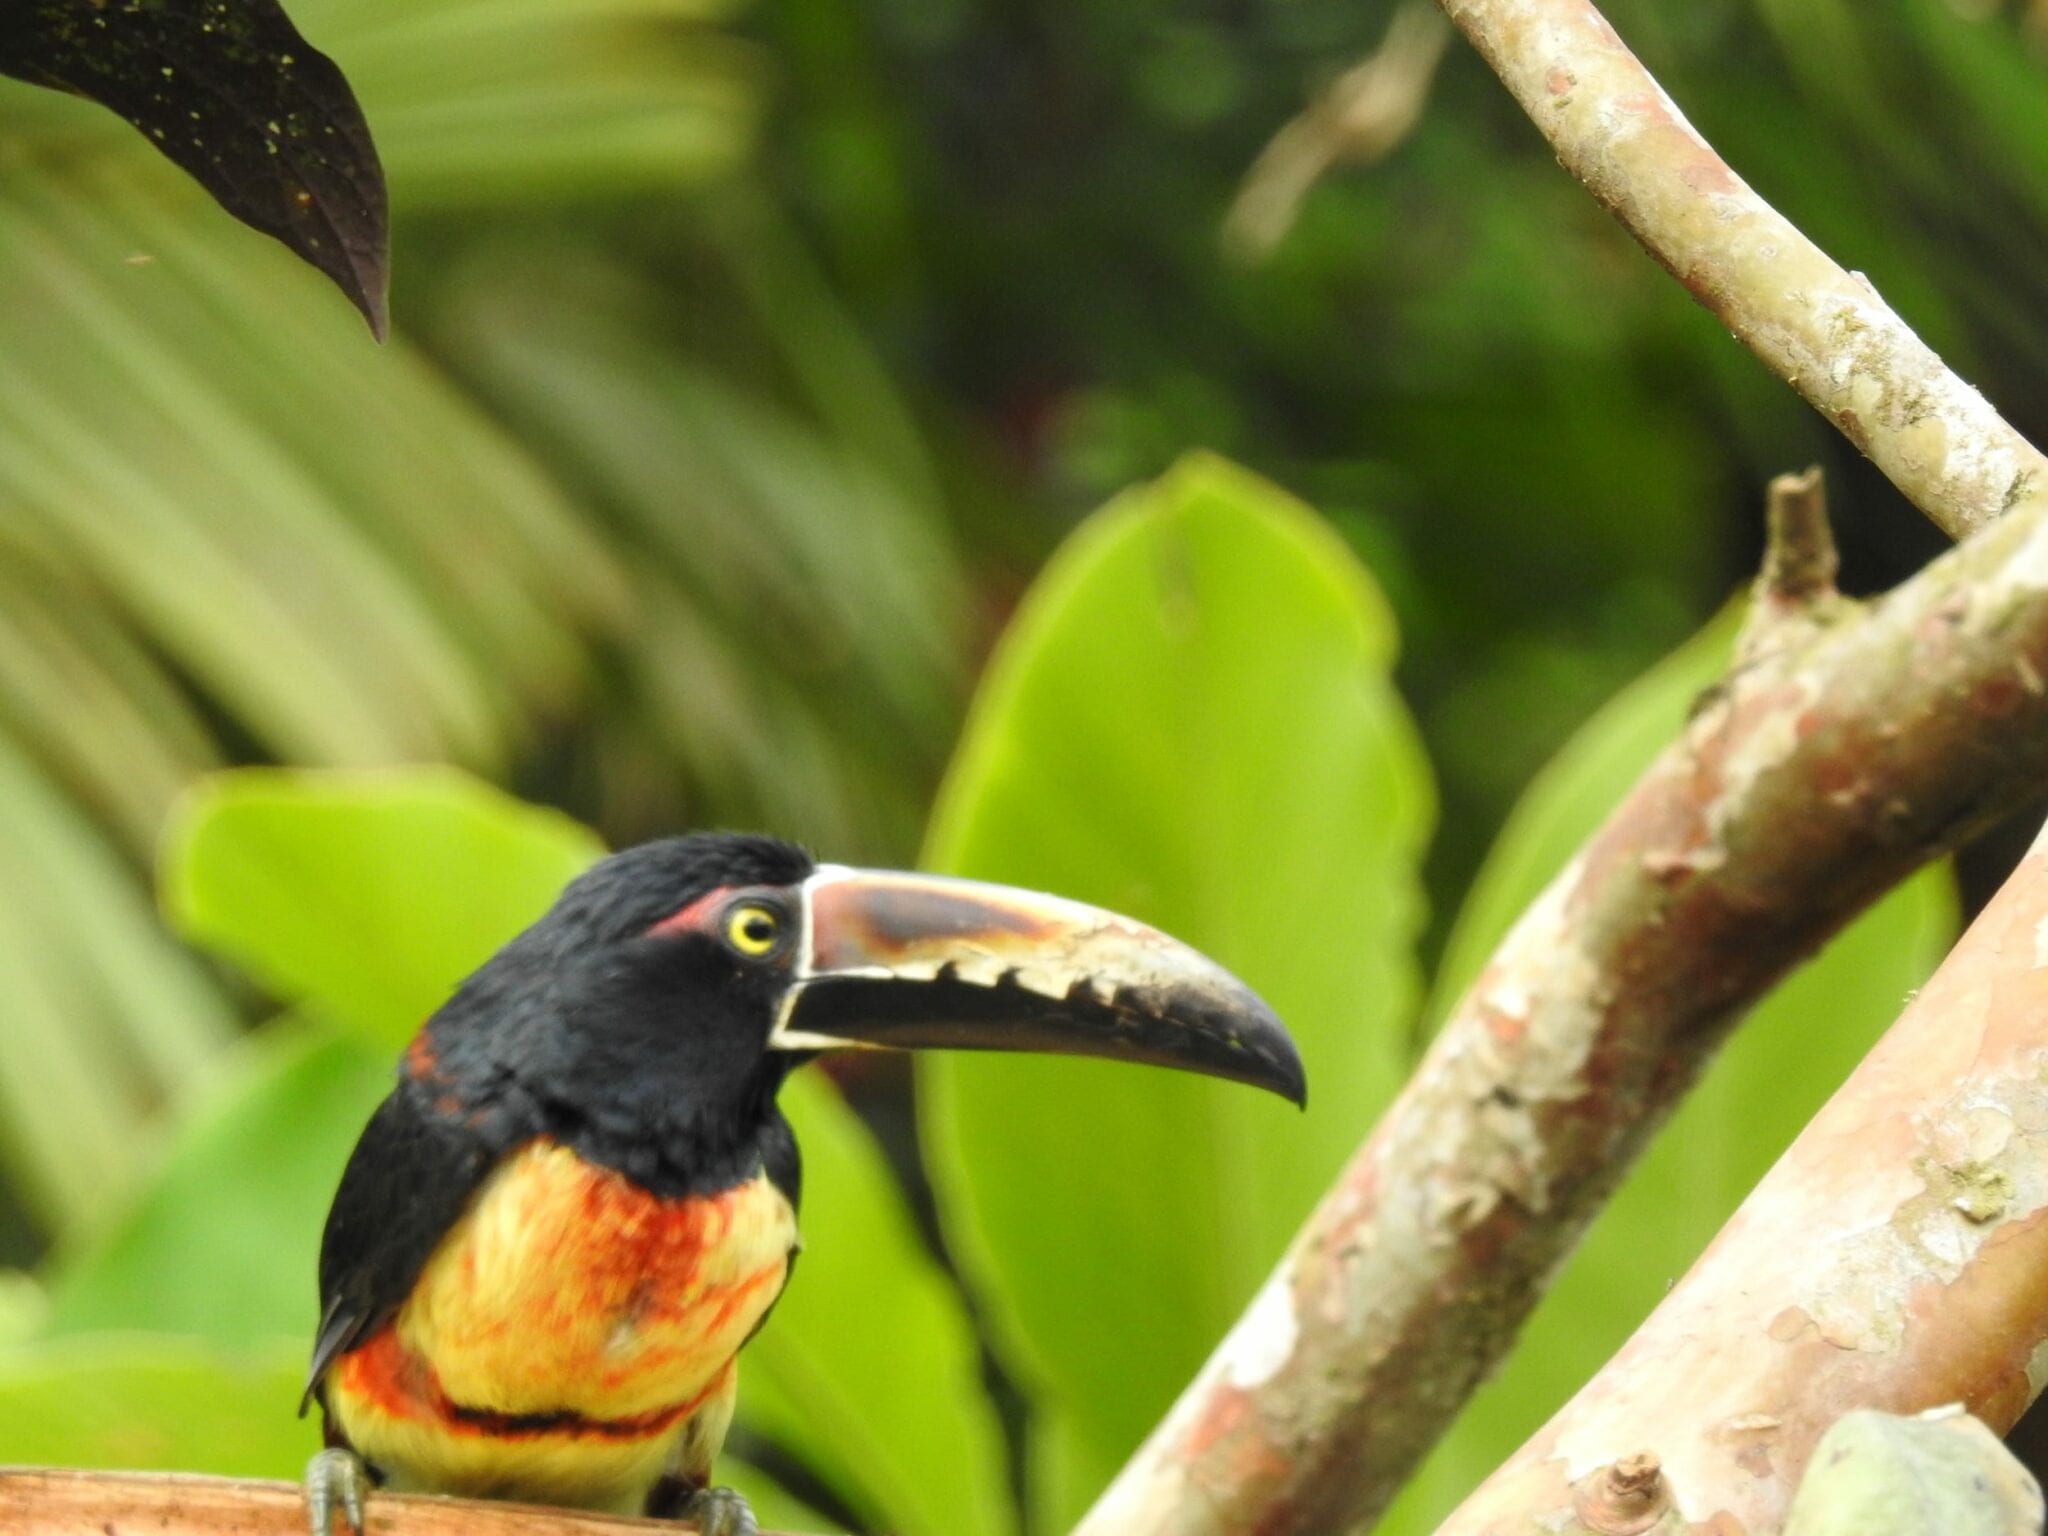 The collared toucanet